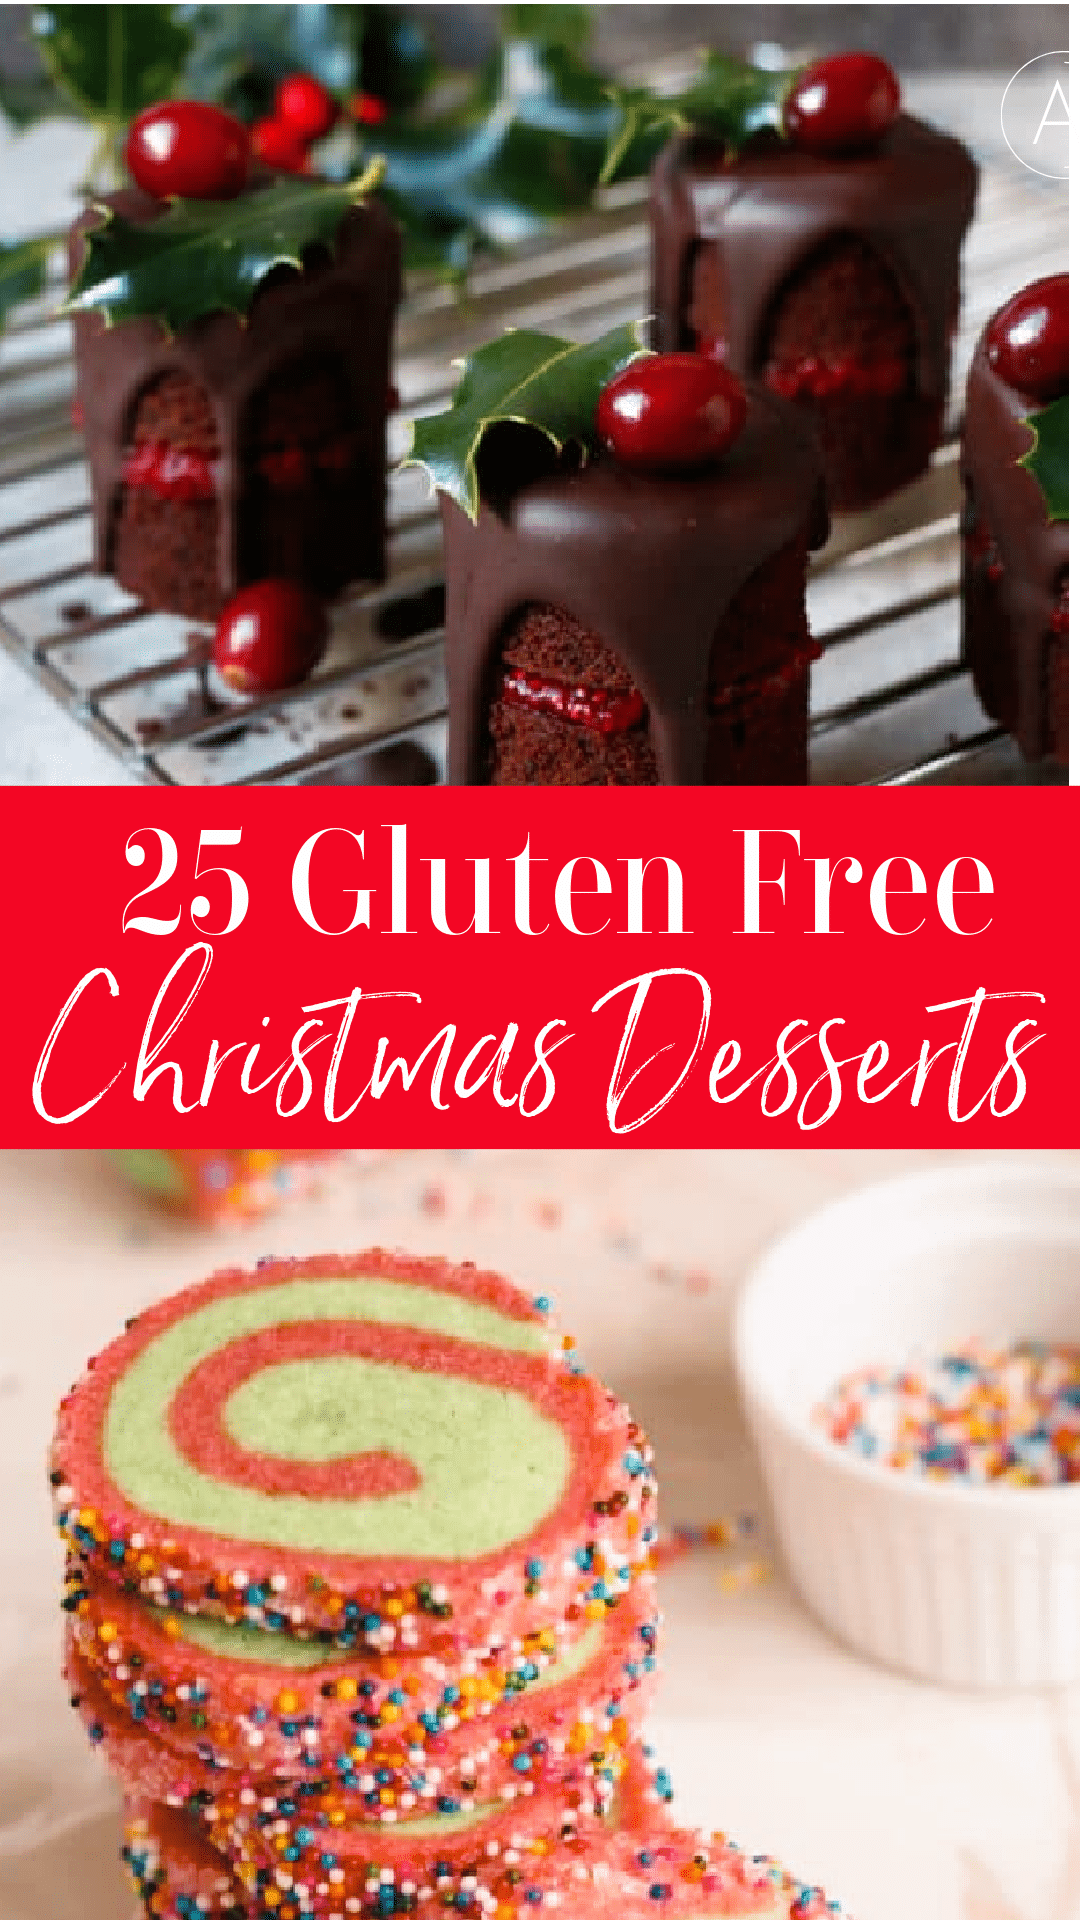 25 Gluten Free Christmas Desserts - Recipes Worth Repeating